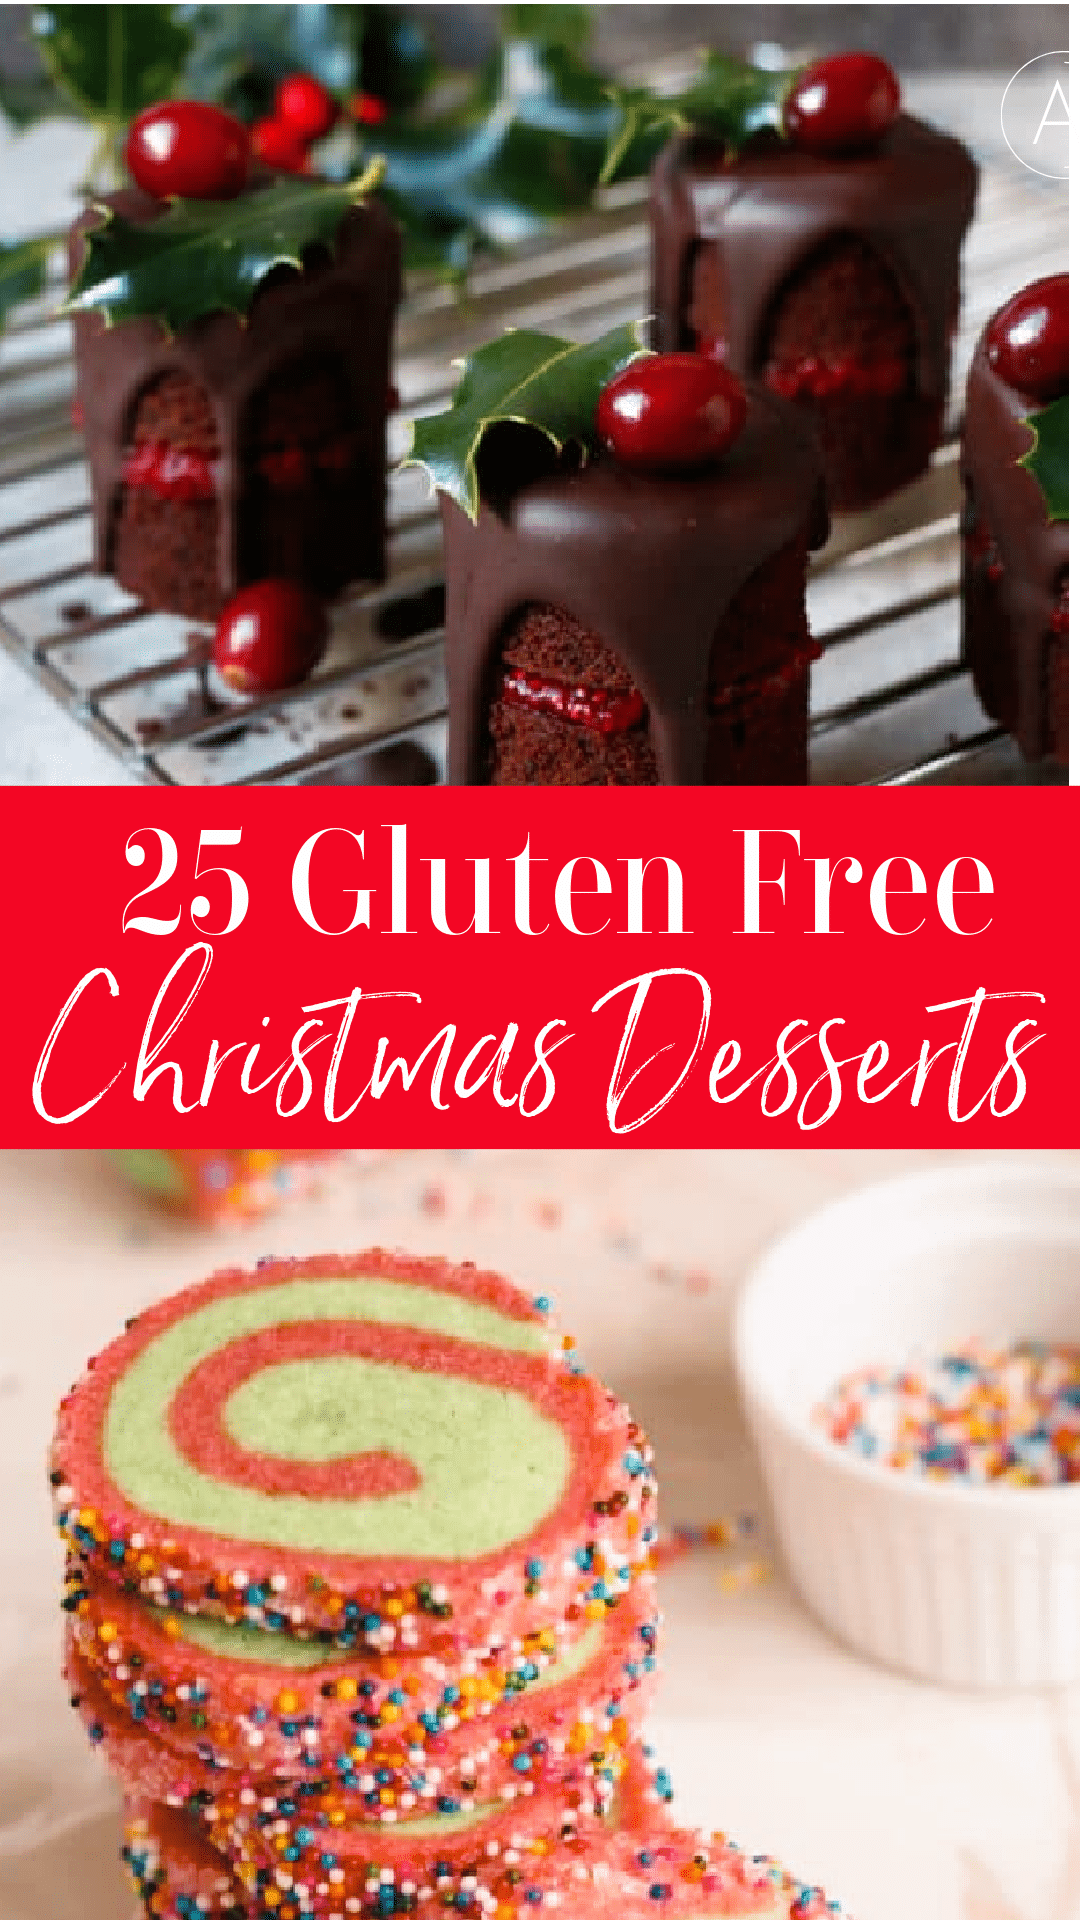 25 Gluten Free Christmas Desserts - Recipes Worth Repeating